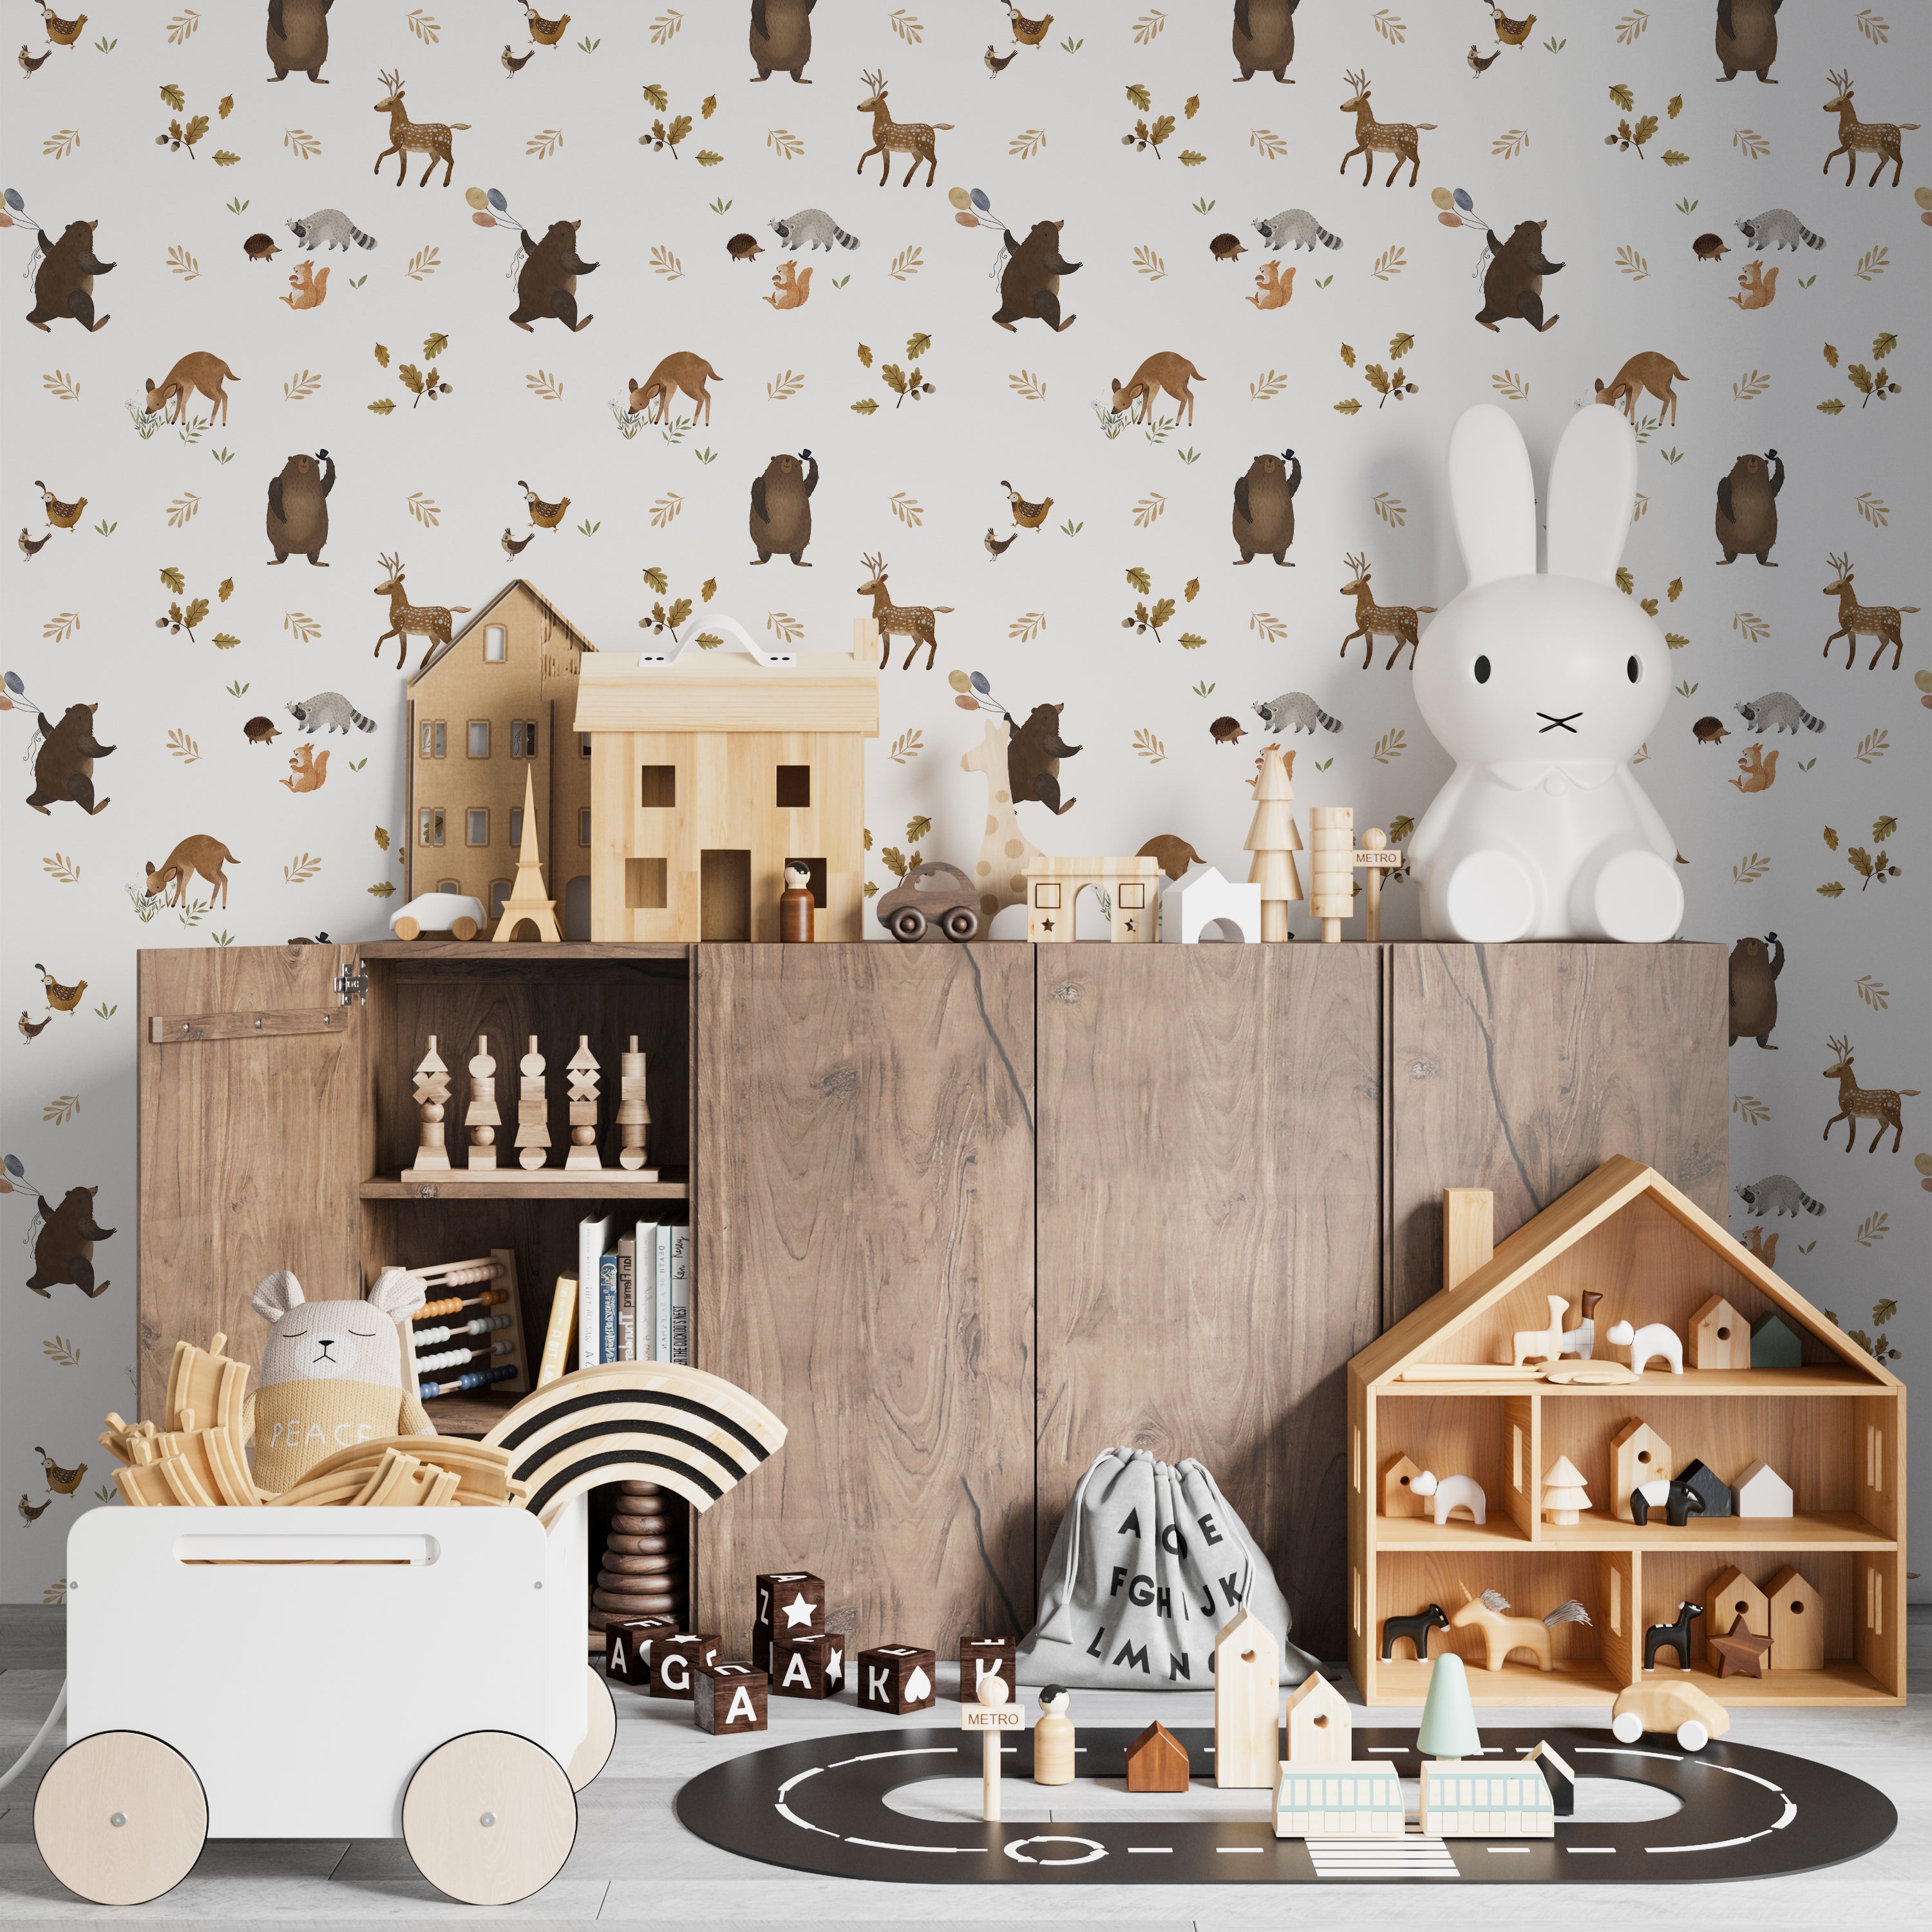 Decorative scene showing Forest Bear Wallpaper in a children's room setting. The wallpaper, filled with charming forest creatures such as bears, deer, and raccoons, complements a playfully arranged room with soft toys and children’s furniture, perfect for sparking imagination.